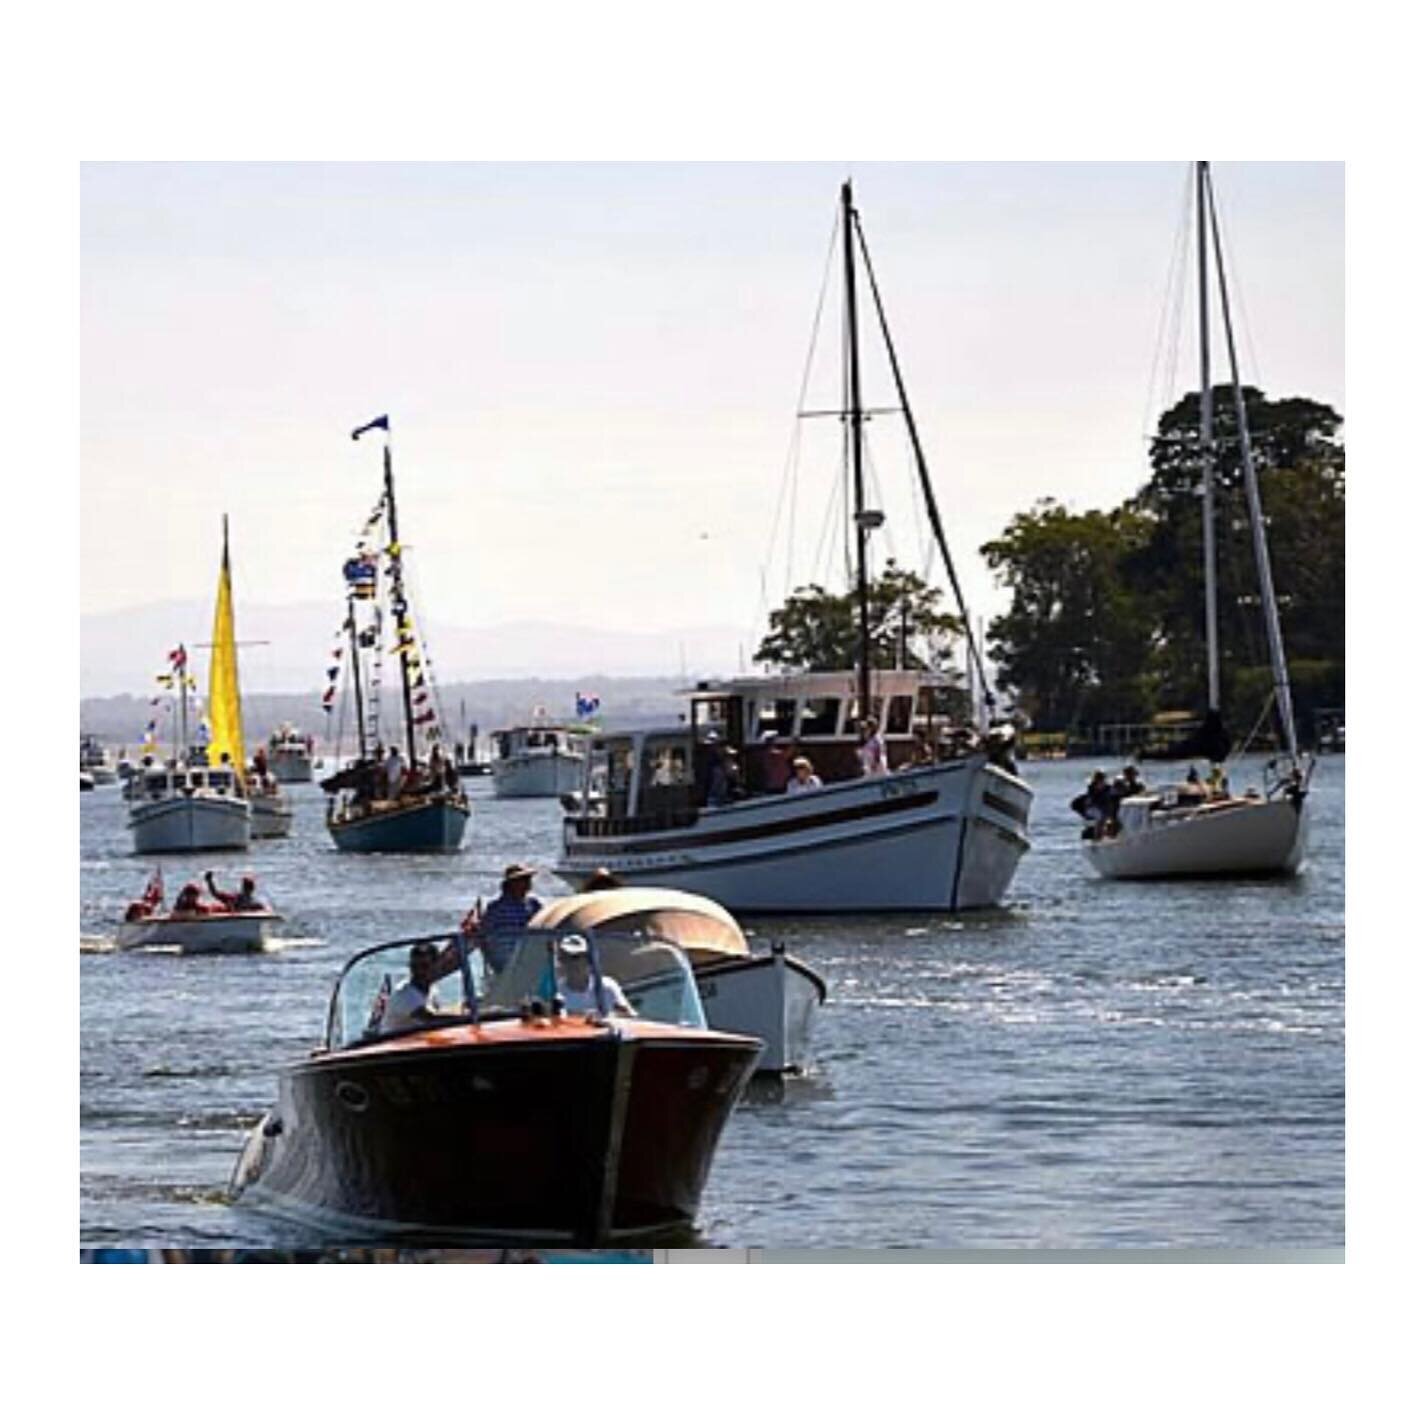 We&rsquo;ve heard about seven traditional boat gatherings over the next few months in this part of the world&hellip;. Kettering, Inverloch, Auckland, Paynesville, Pittwater, Geelong and Bribie Island.  Read more about them in SWS via link in bio and 